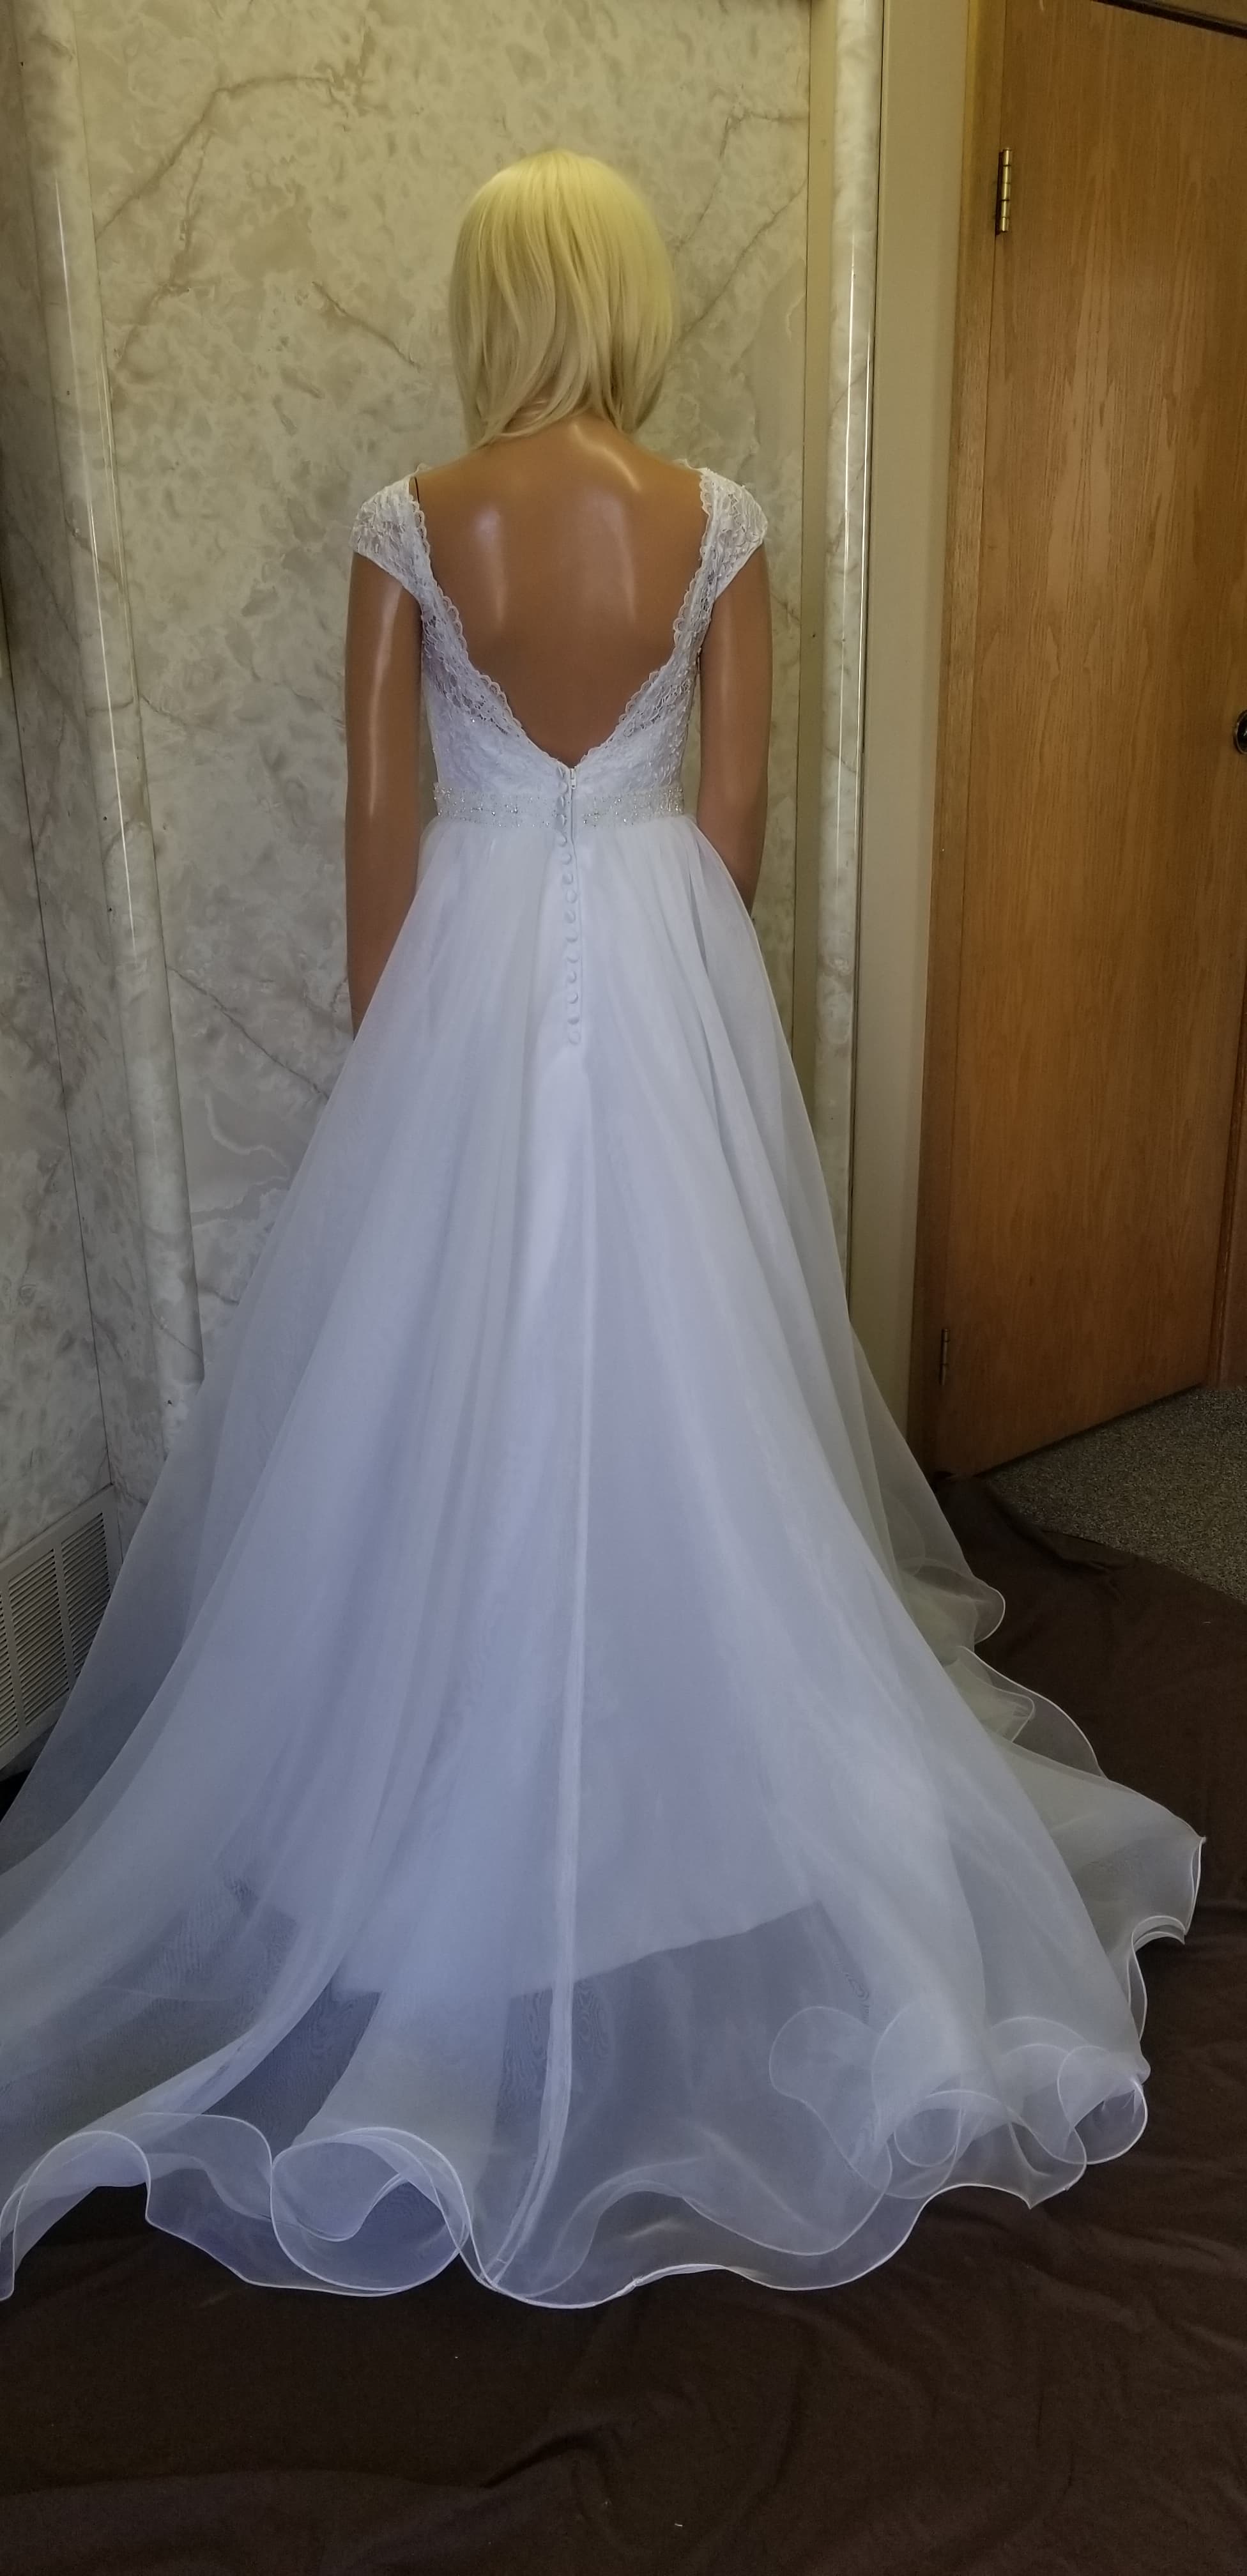 An a-line organza gown with wired hemline, low cut back